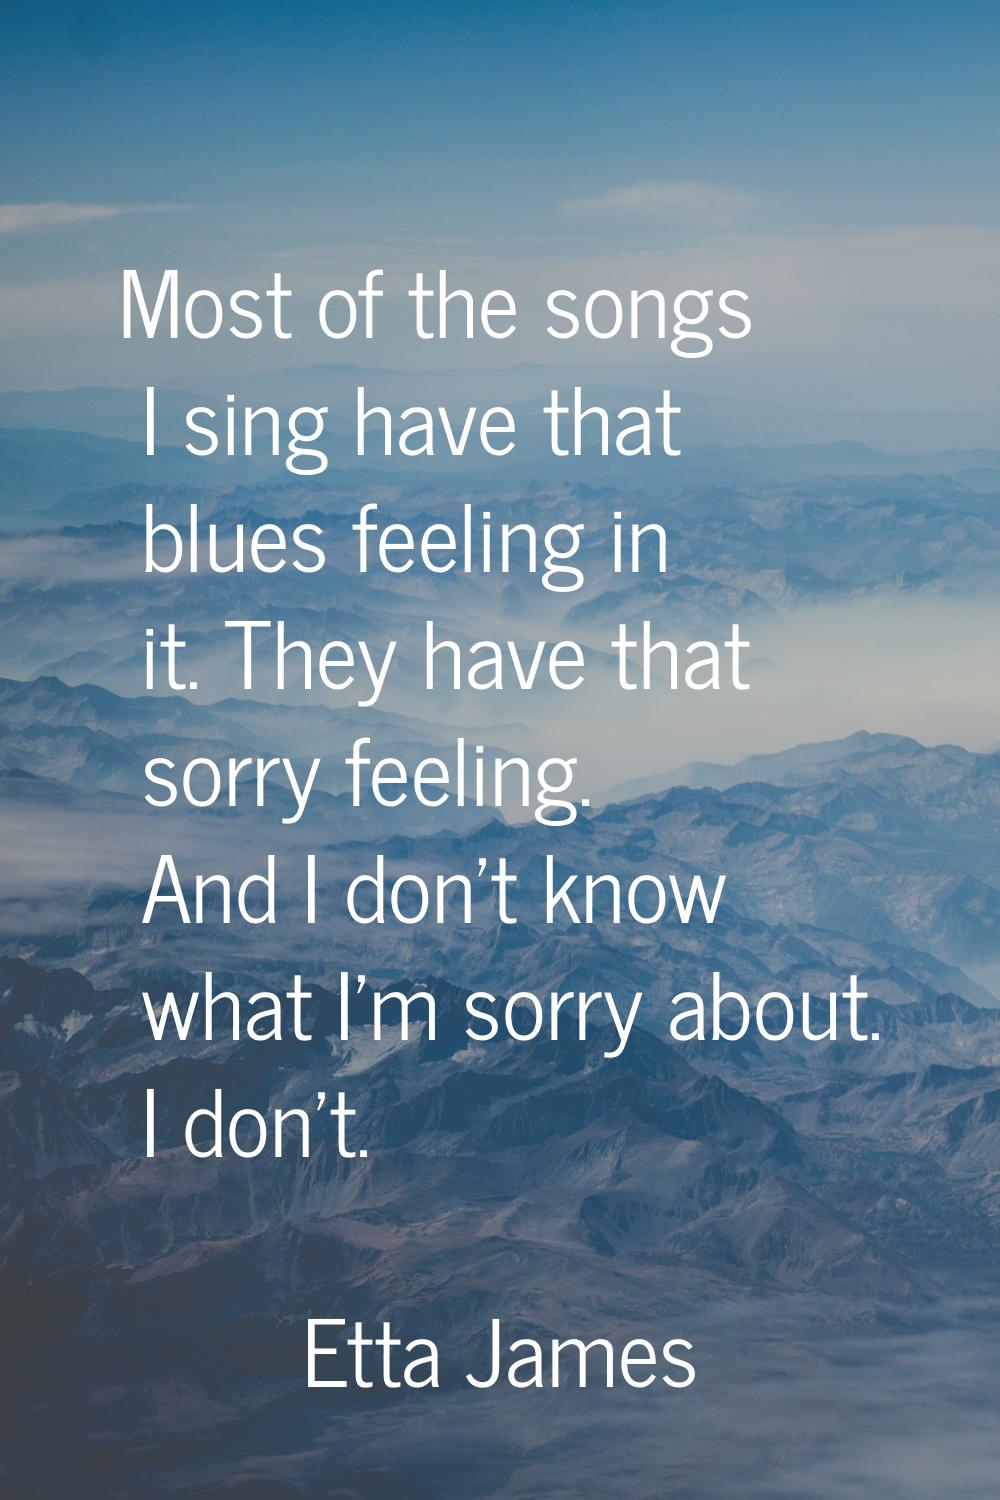 Most of the songs I sing have that blues feeling in it. They have that sorry feeling. And I don't k